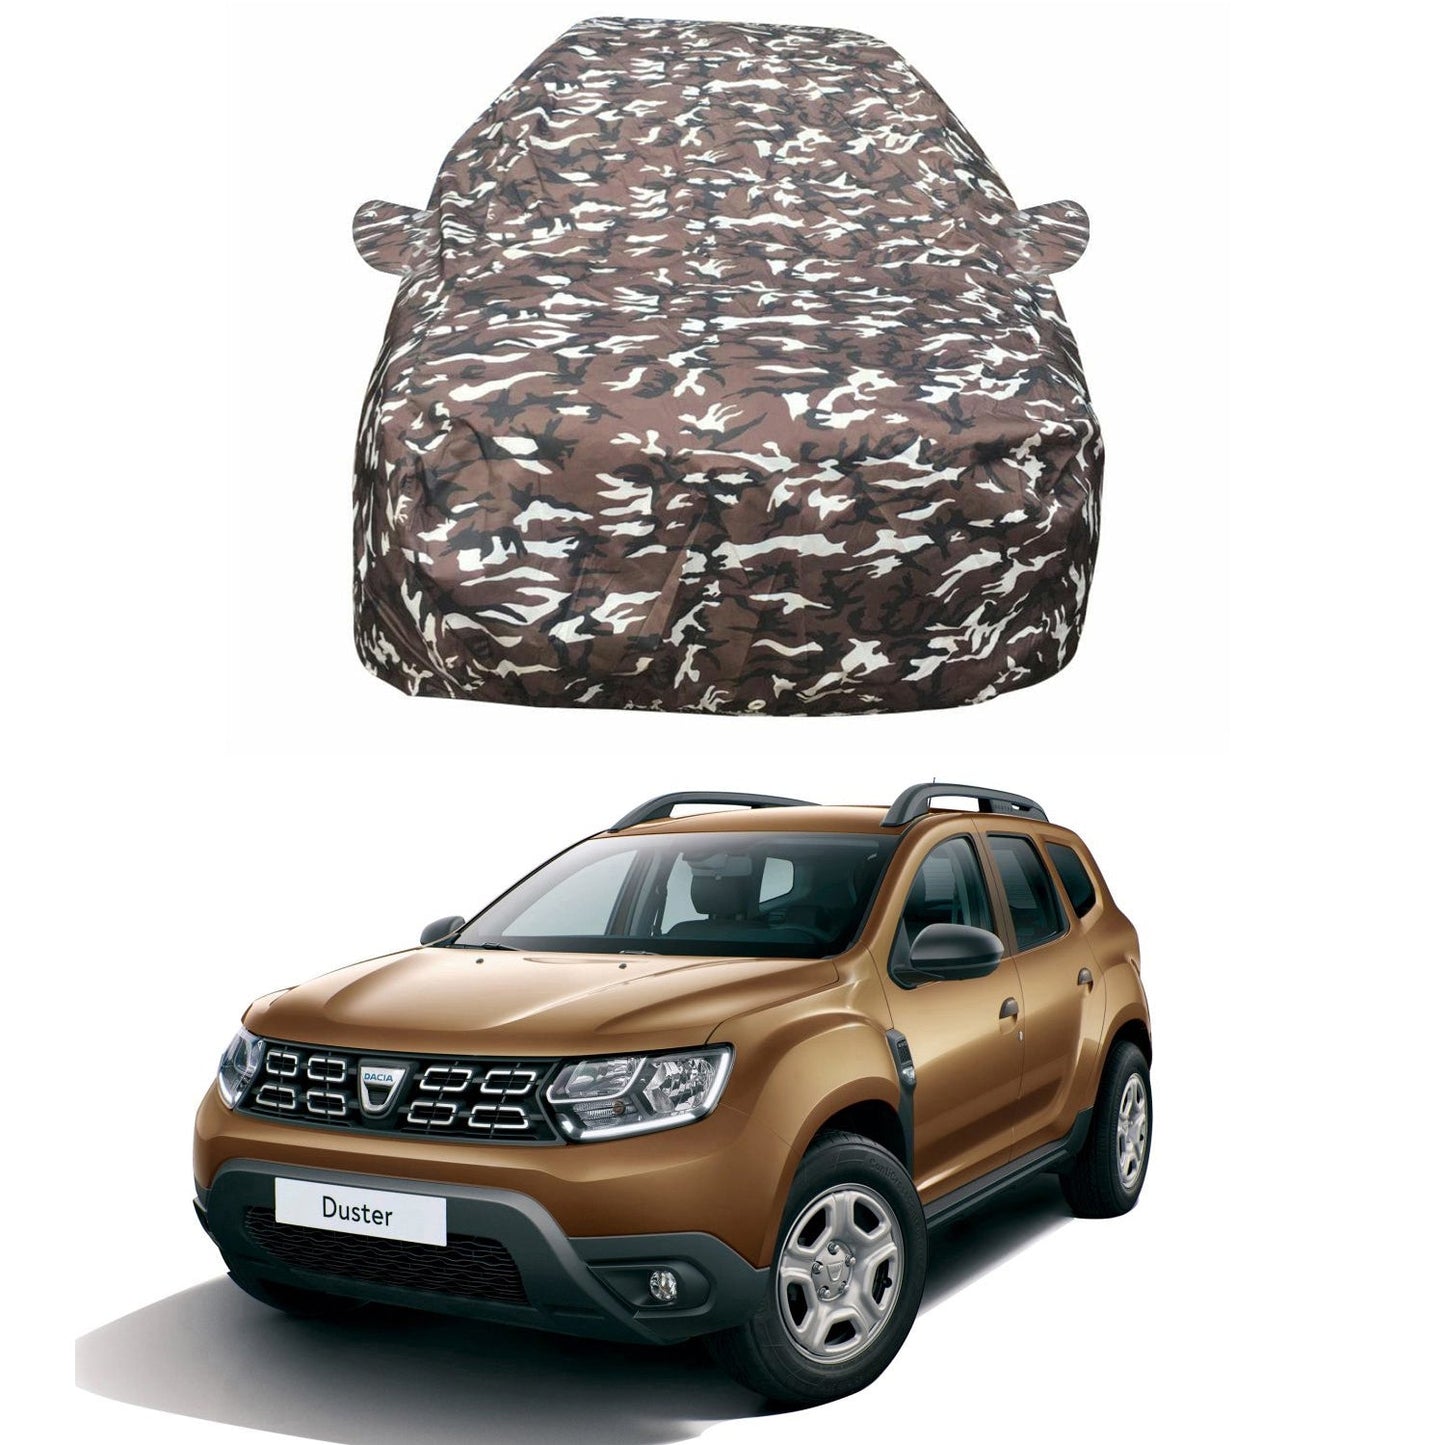 Oshotto Ranger Design Made of 100% Waterproof Fabric Car Body Cover with Mirror Pockets For Renault Duster